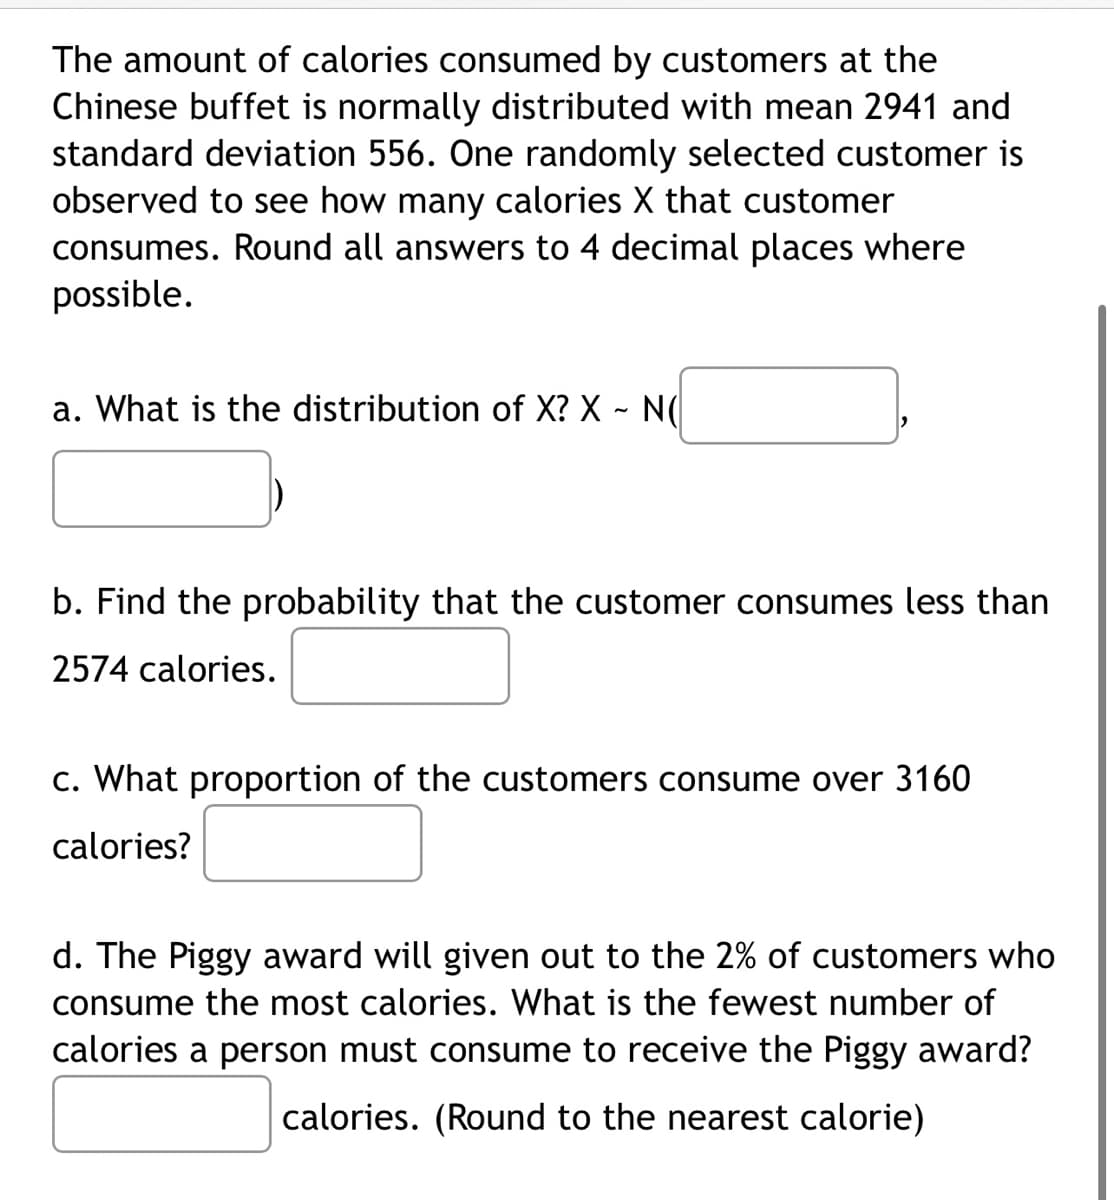 The amount of calories consumed by customers at the
Chinese buffet is normally distributed with mean 2941 and
standard deviation 556. One randomly selected customer is
observed to see how many calories X that customer
consumes. Round all answers to 4 decimal places where
possible.
a. What is the distribution of X? X - N(
b. Find the probability that the customer consumes less than
2574 calories.
c. What proportion of the customers consume over 3160
calories?
d. The Piggy award will given out to the 2% of customers who
consume the most calories. What is the fewest number of
calories a person must consume to receive the Piggy award?
calories. (Round to the nearest calorie)